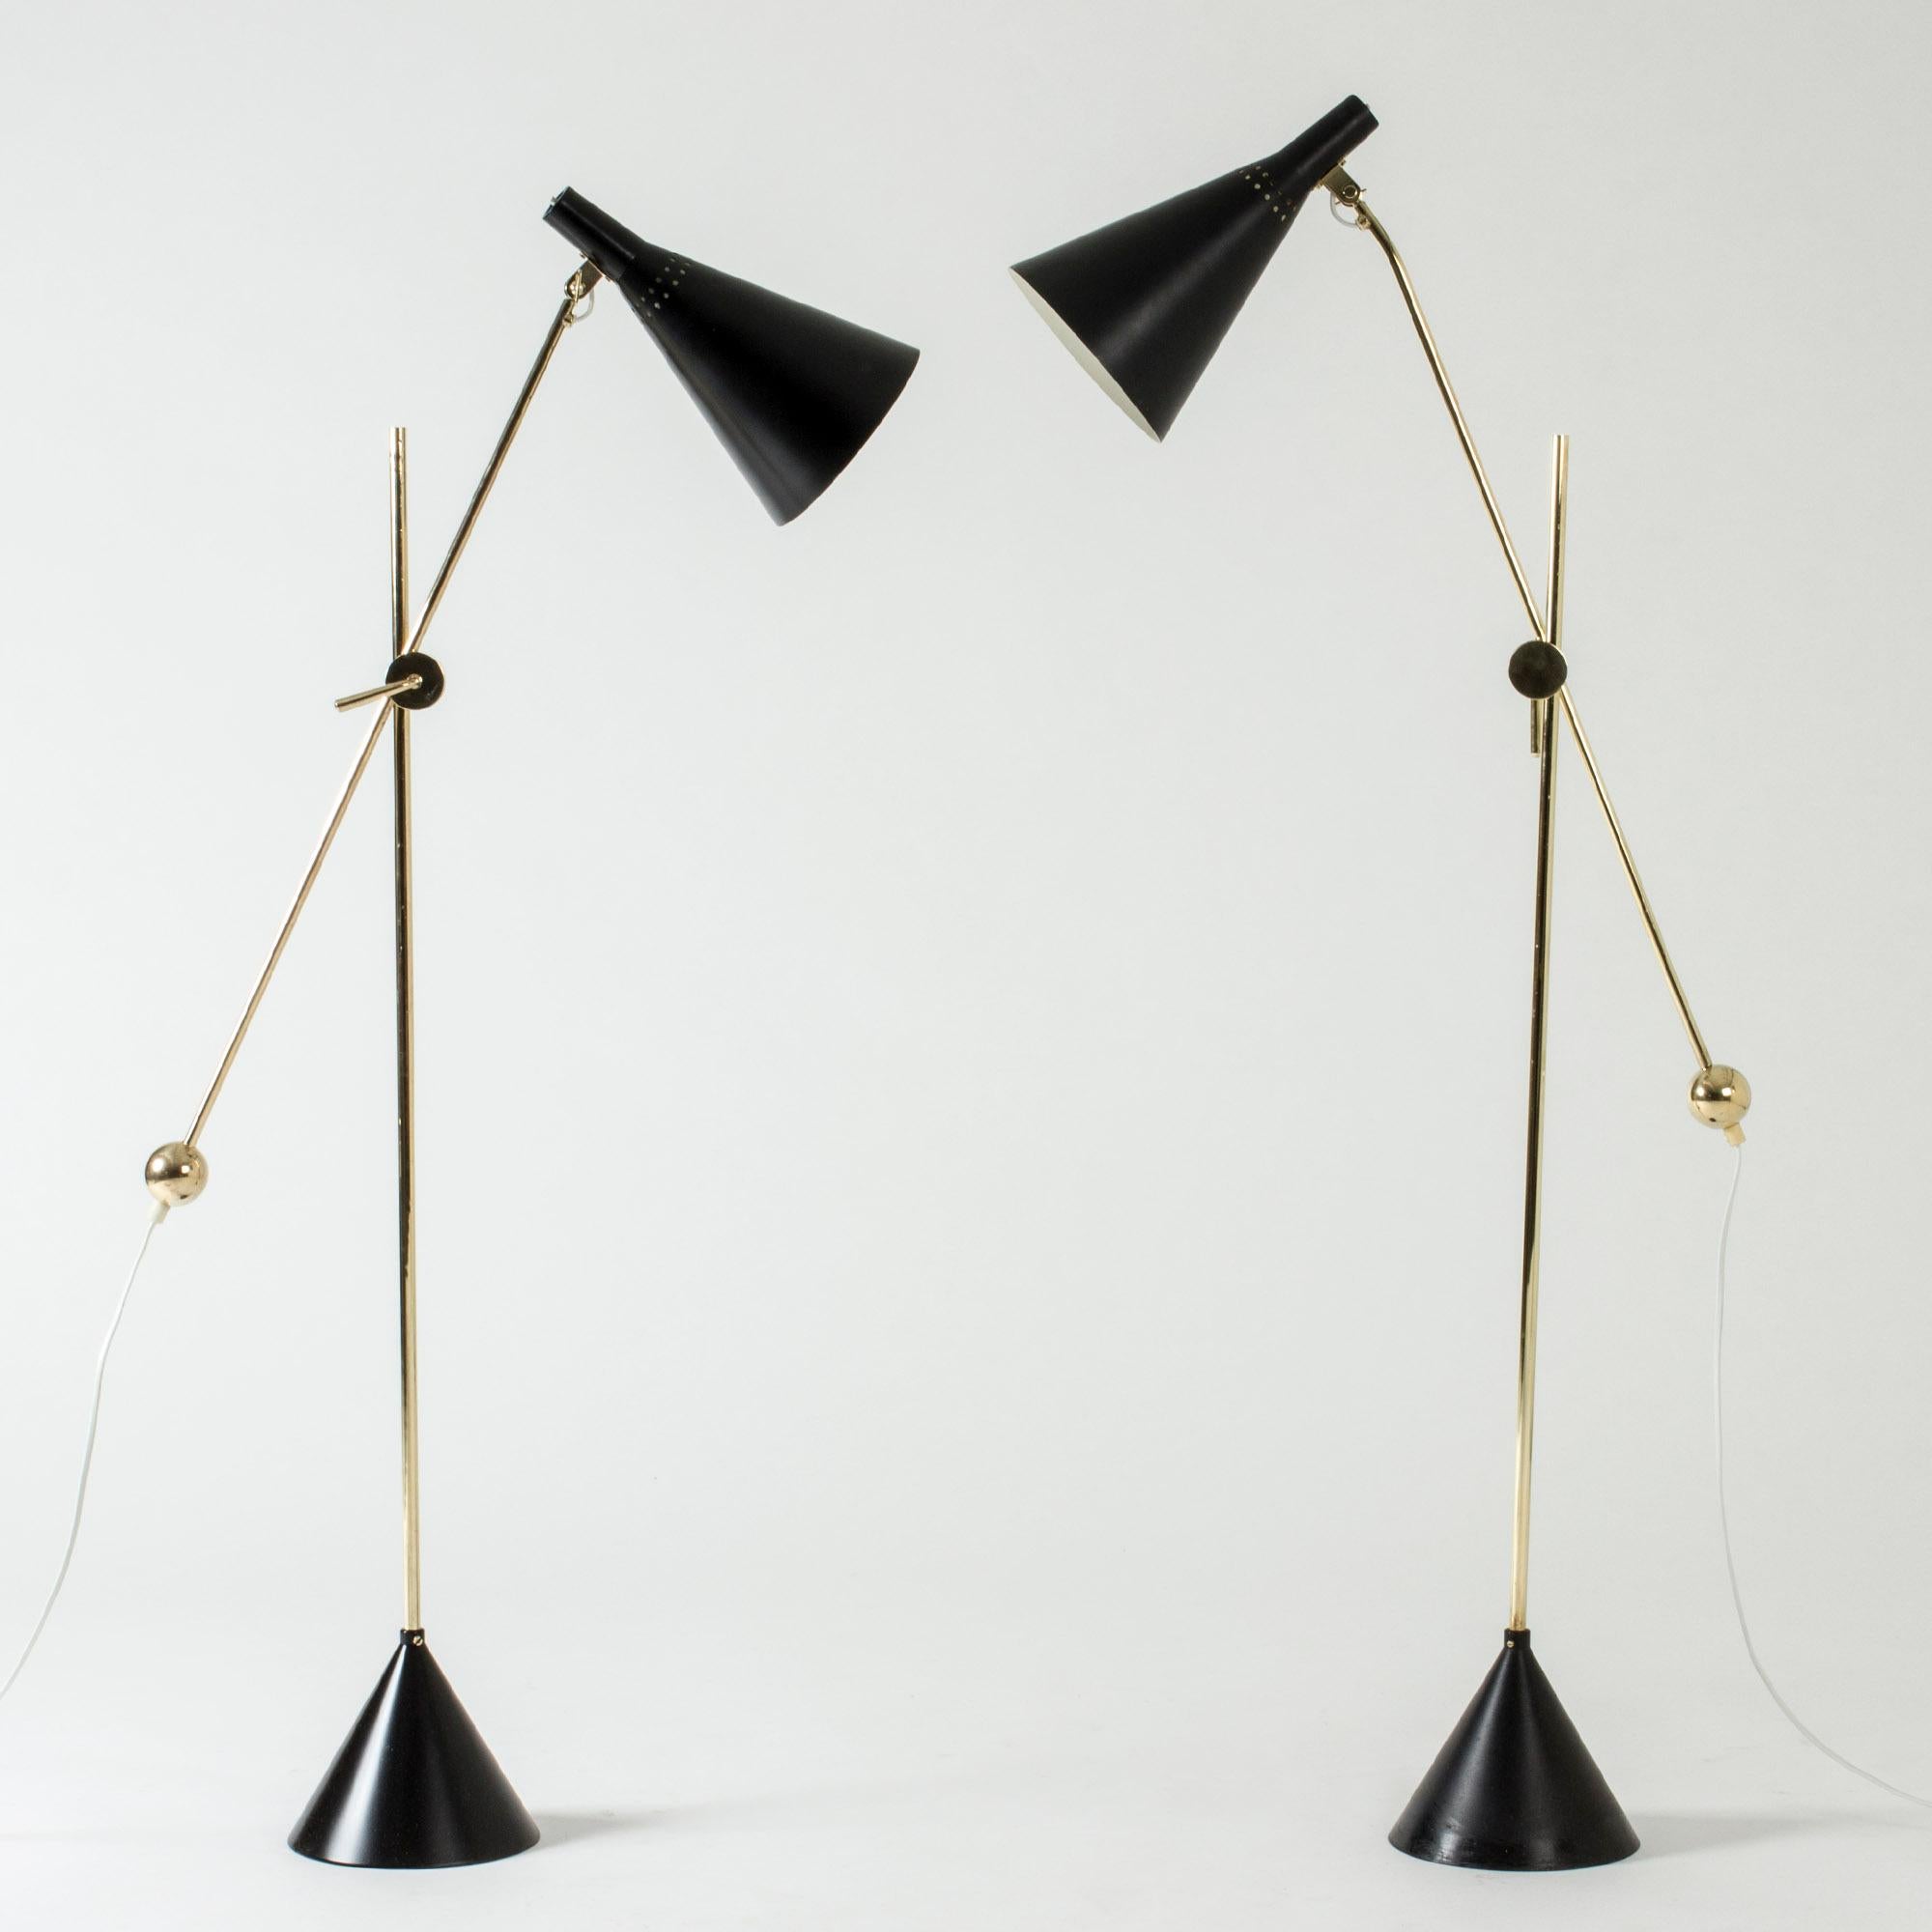 Finnish Pair of Lacquered Metal and Brass Floor Lamps by Tapio Wirkkala for Idman Oy